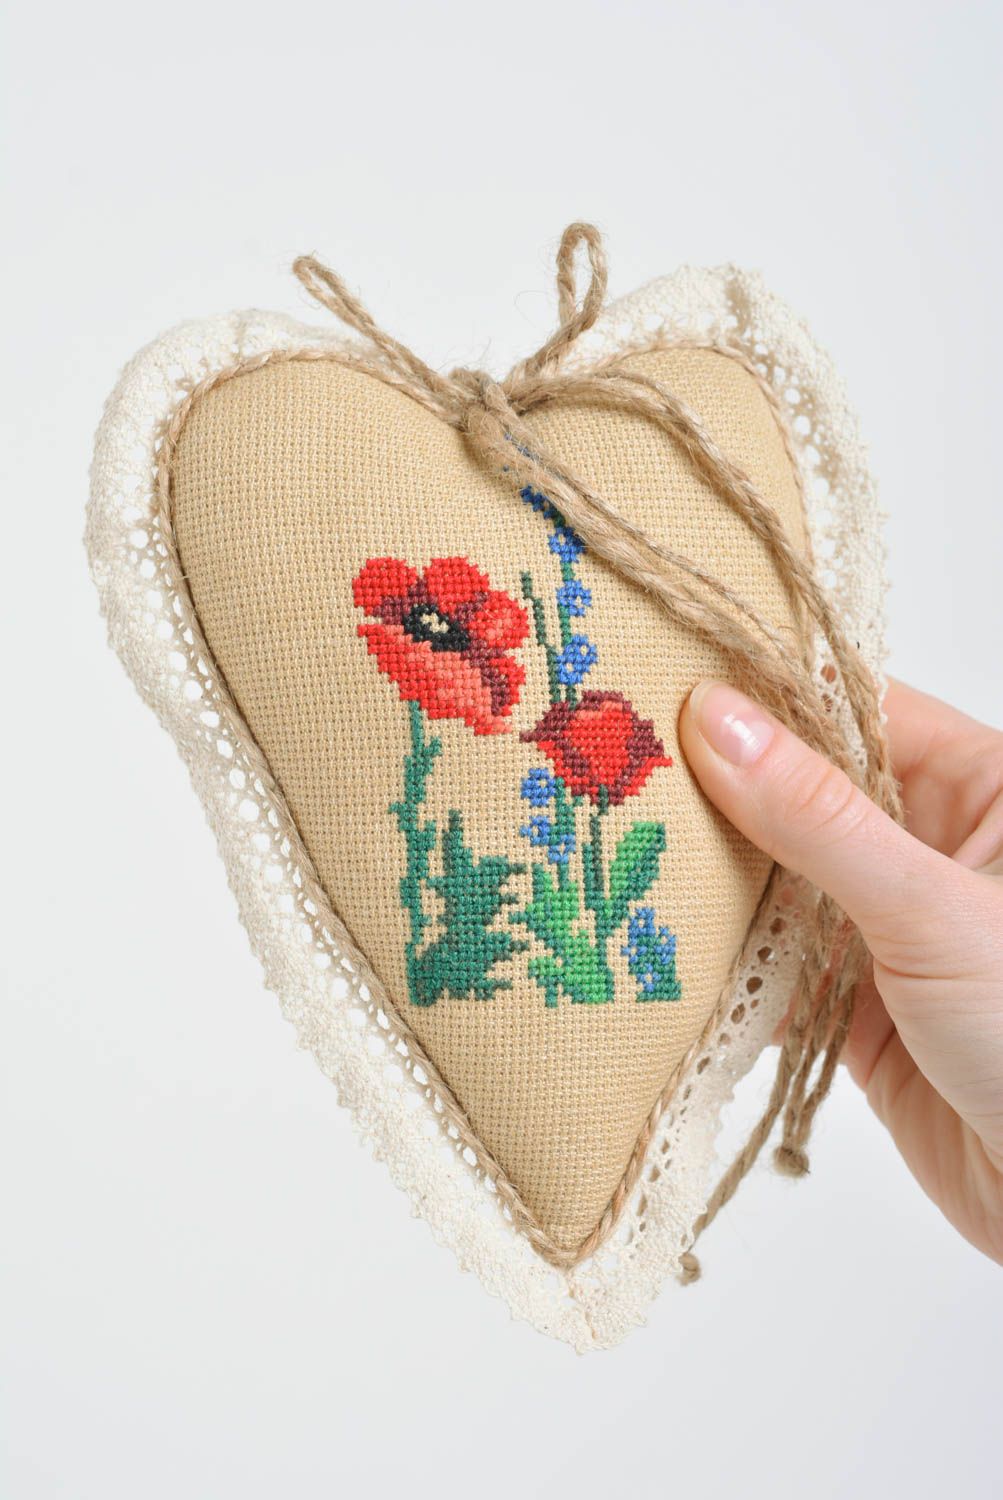 Handmade decorative wall hanging soft fabric heart with embroidered poppies photo 5